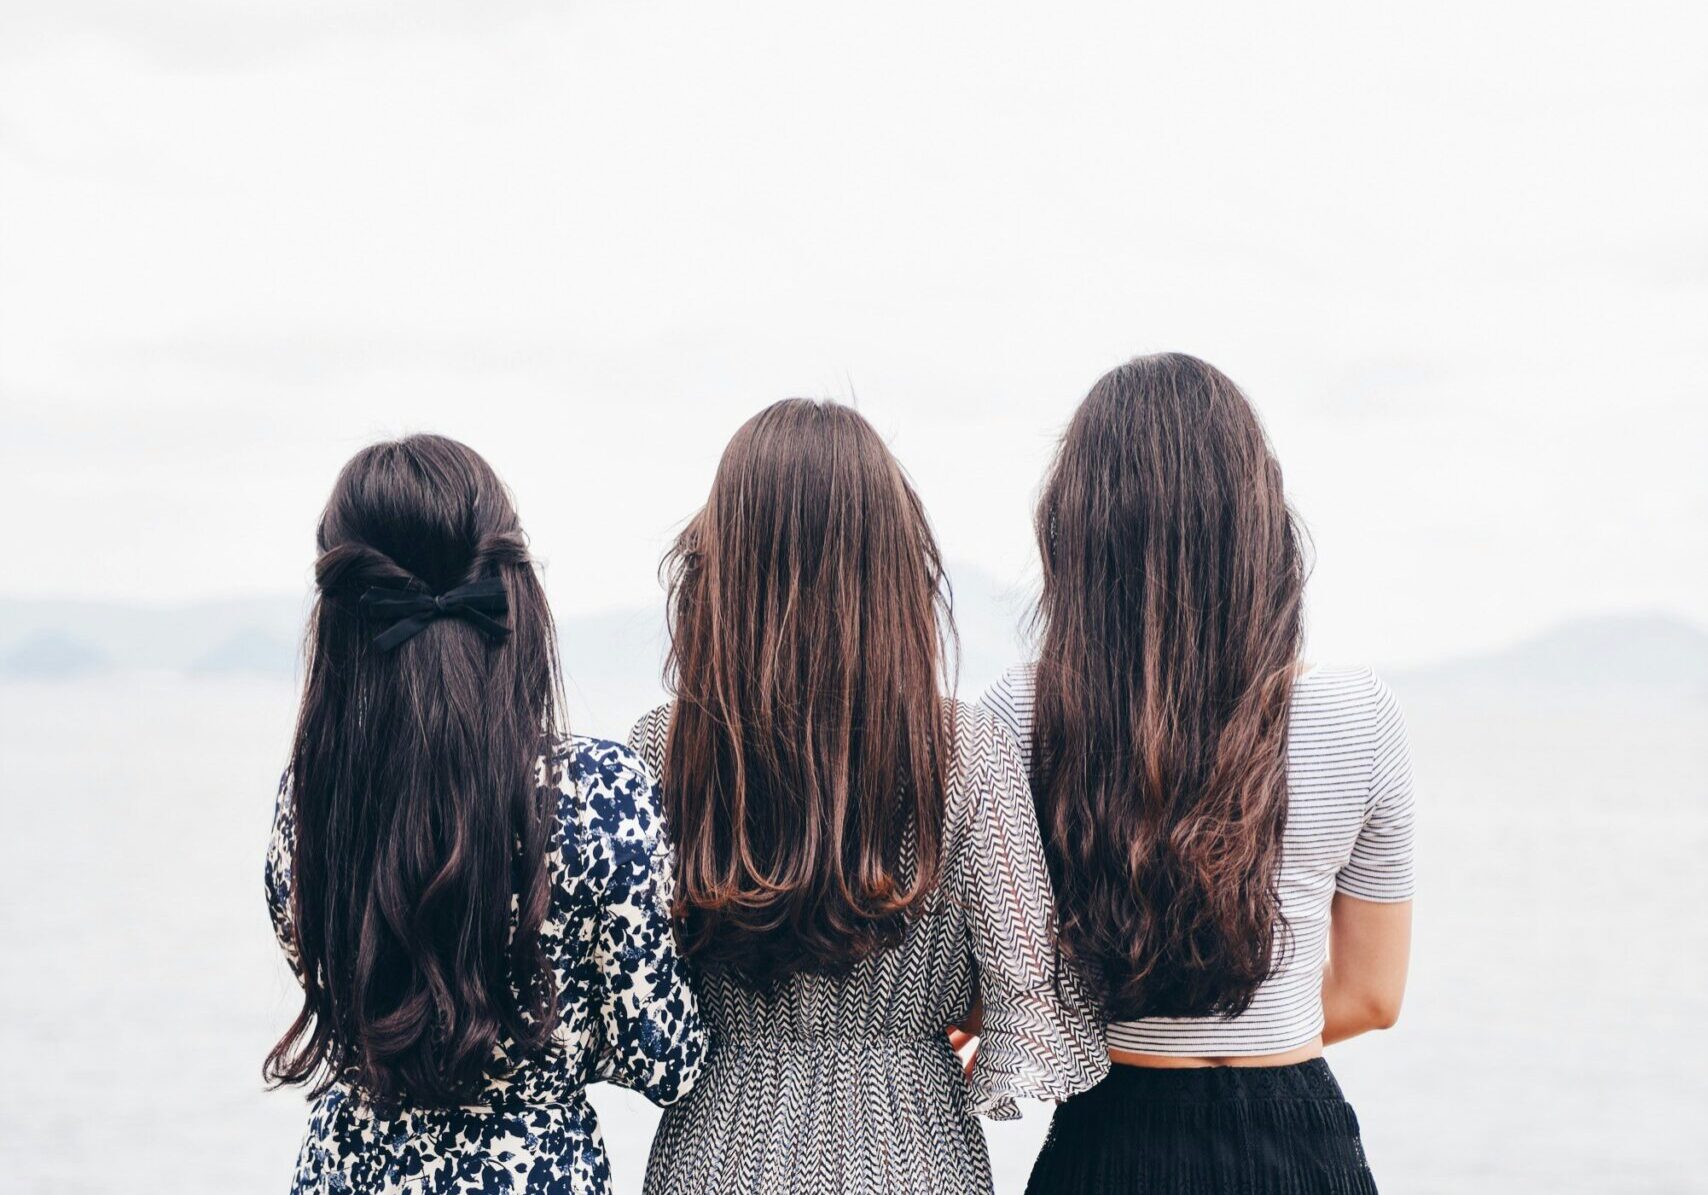 3 women standing with their back to the camera.